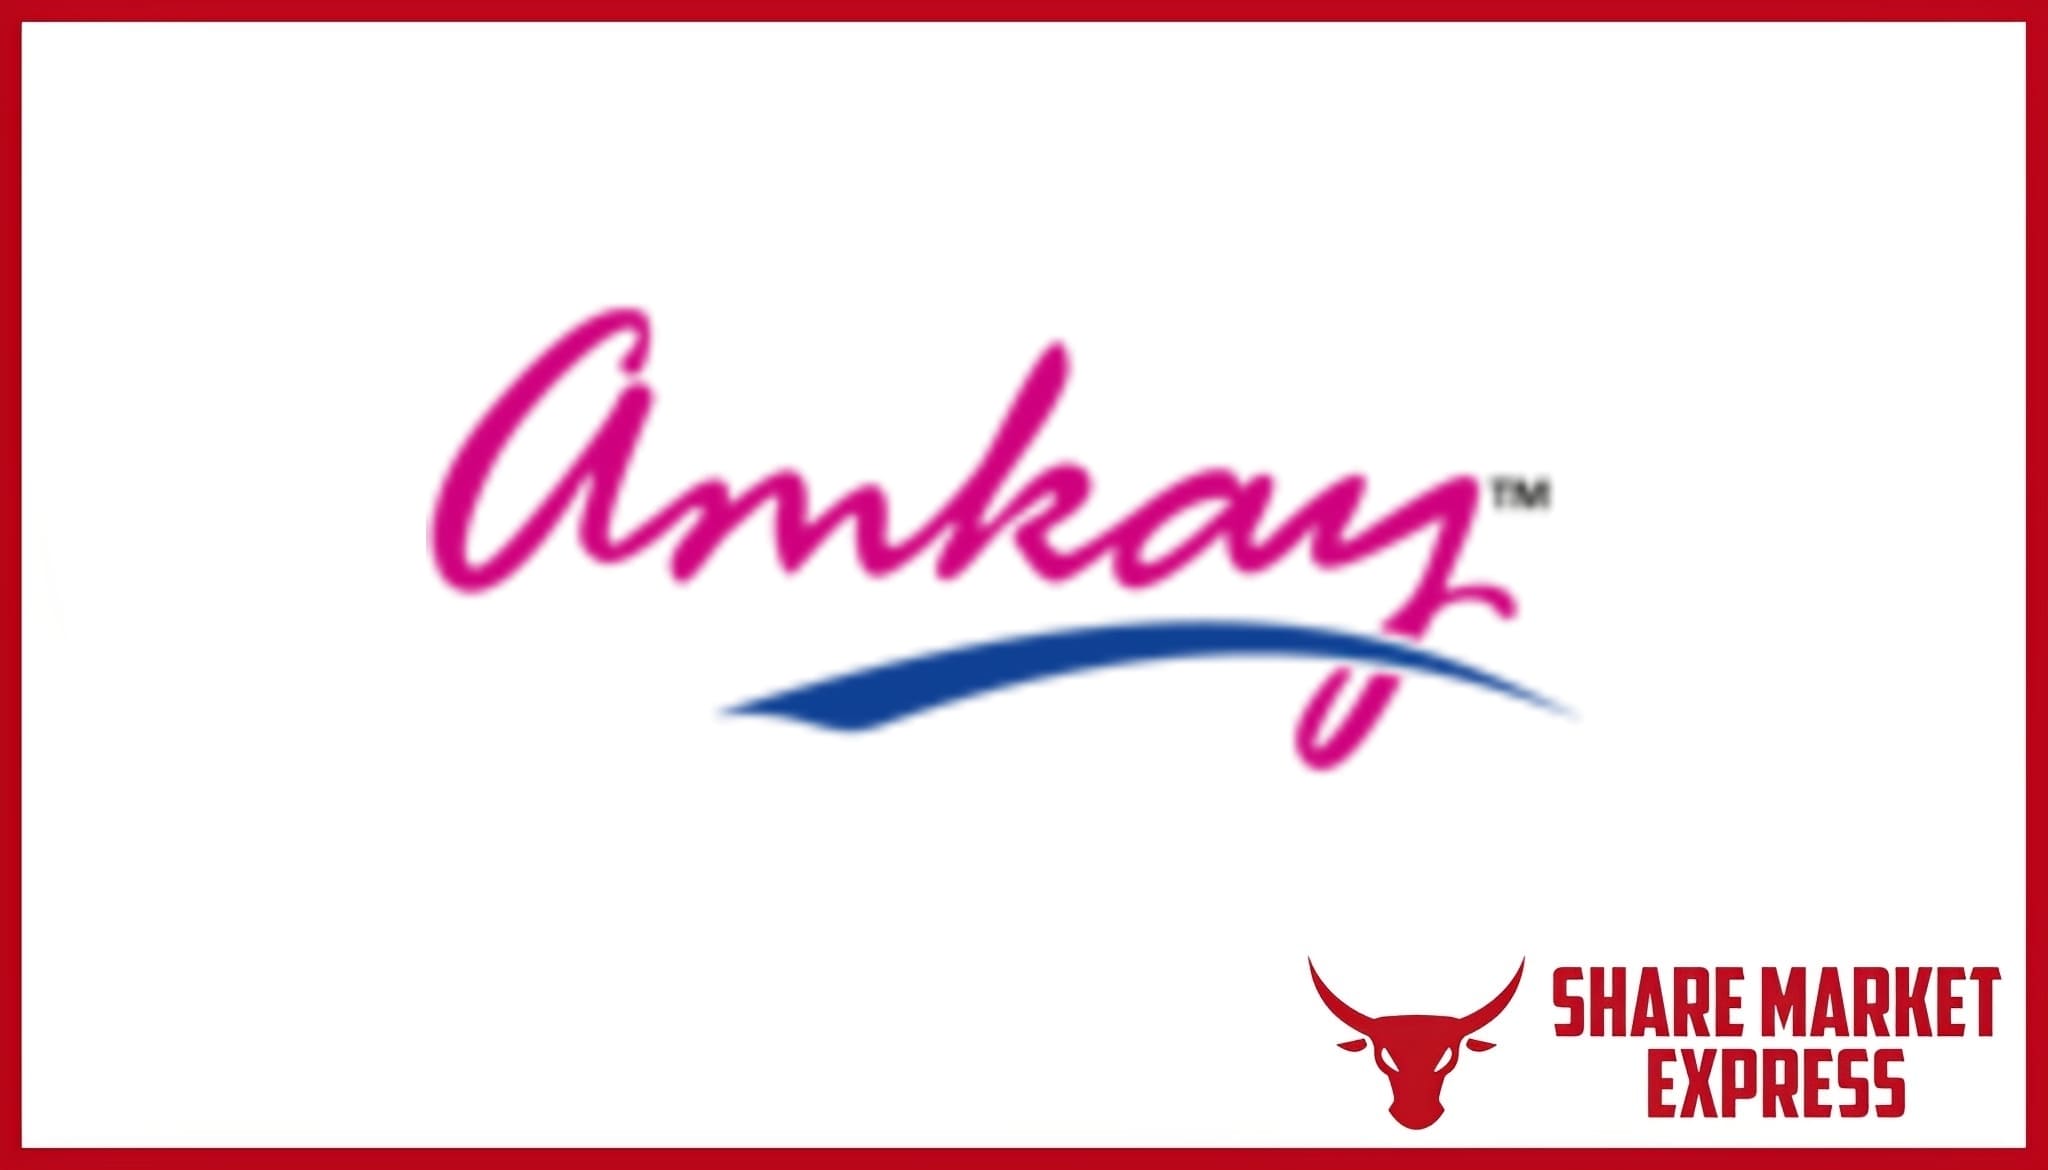 Amkay Products IPO